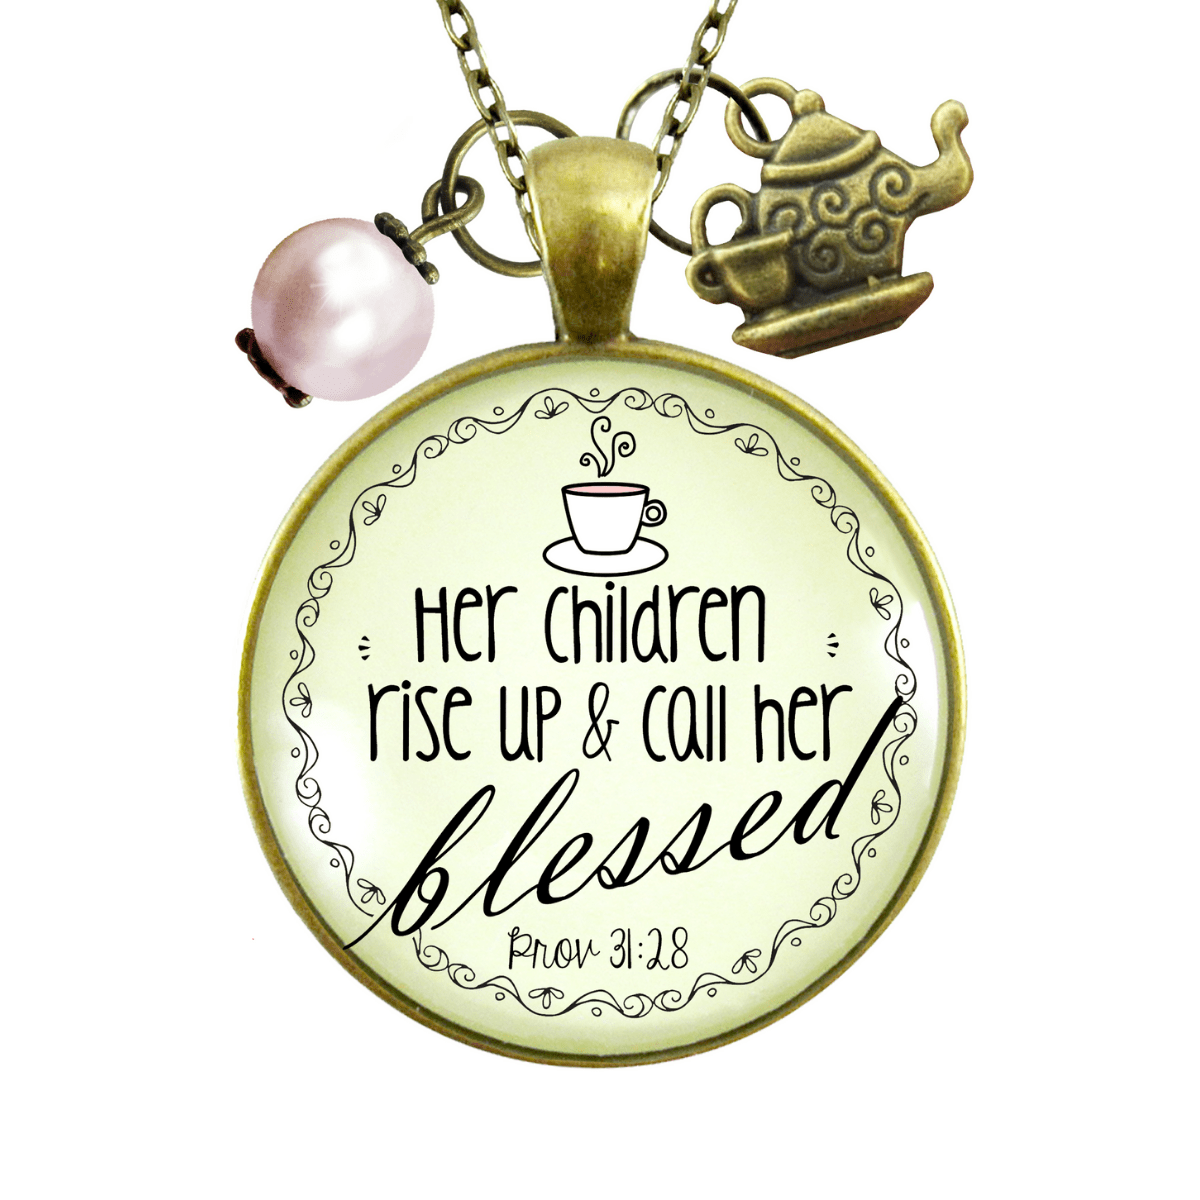 Gutsy Goodness Blessed Mother Necklace Proverb 31 Christian Mom Jewelry Teapot Charm Rose Chain - Gutsy Goodness Handmade Jewelry;Blessed Mother Necklace Proverb 31 Christian Mom Jewelry Teapot Charm Rose Chain - Gutsy Goodness Handmade Jewelry Gifts